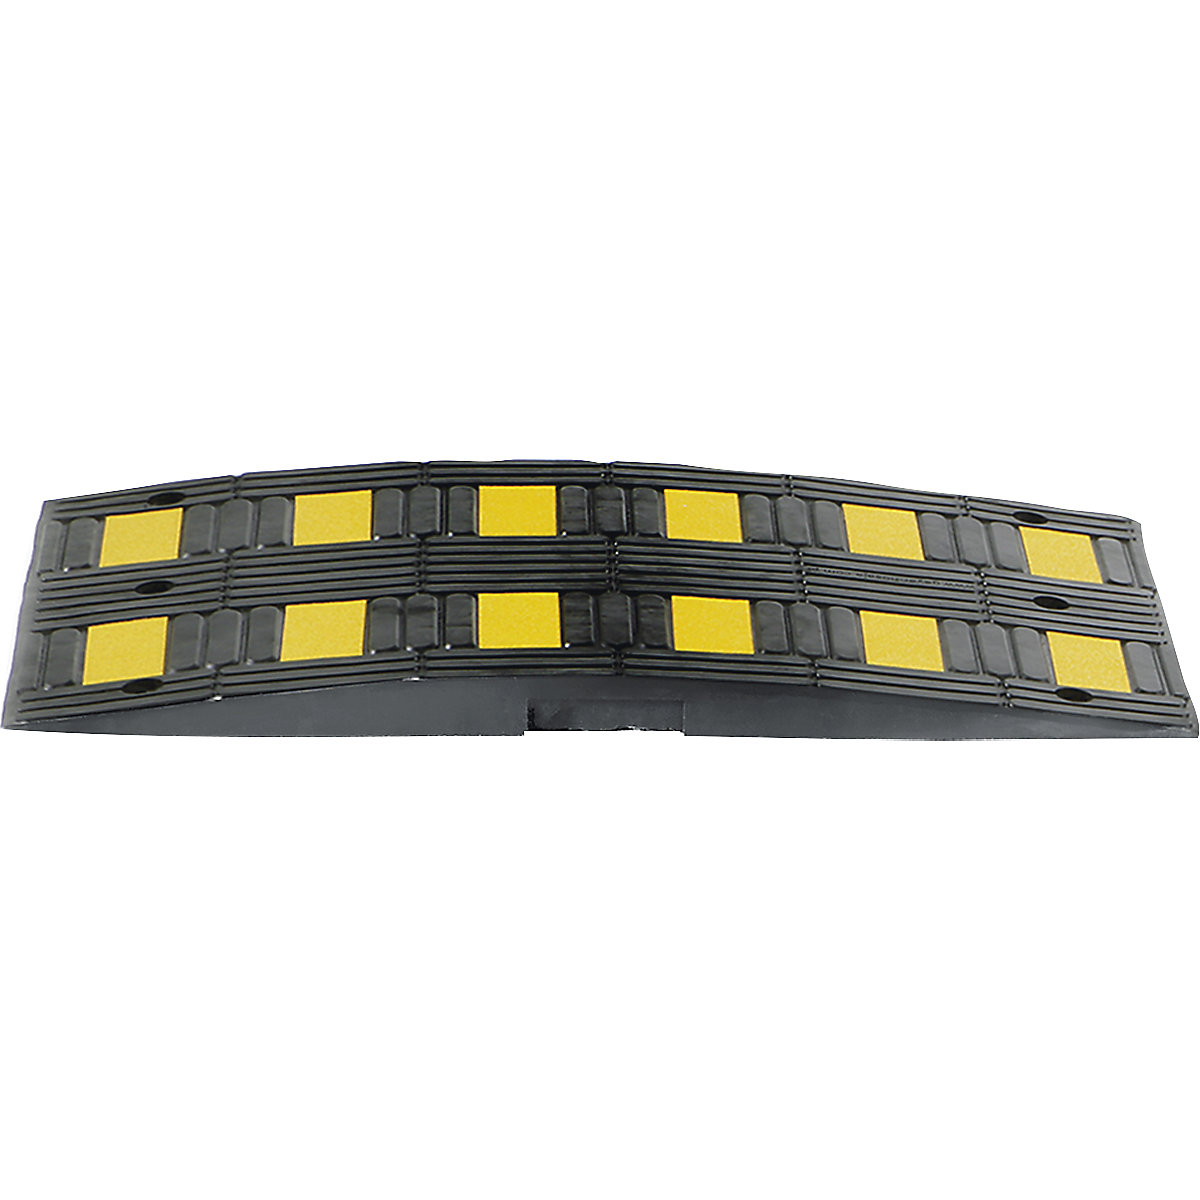 Speed ramp made of recycled rubber, yellow / black, for speed limit 30 km/h-5